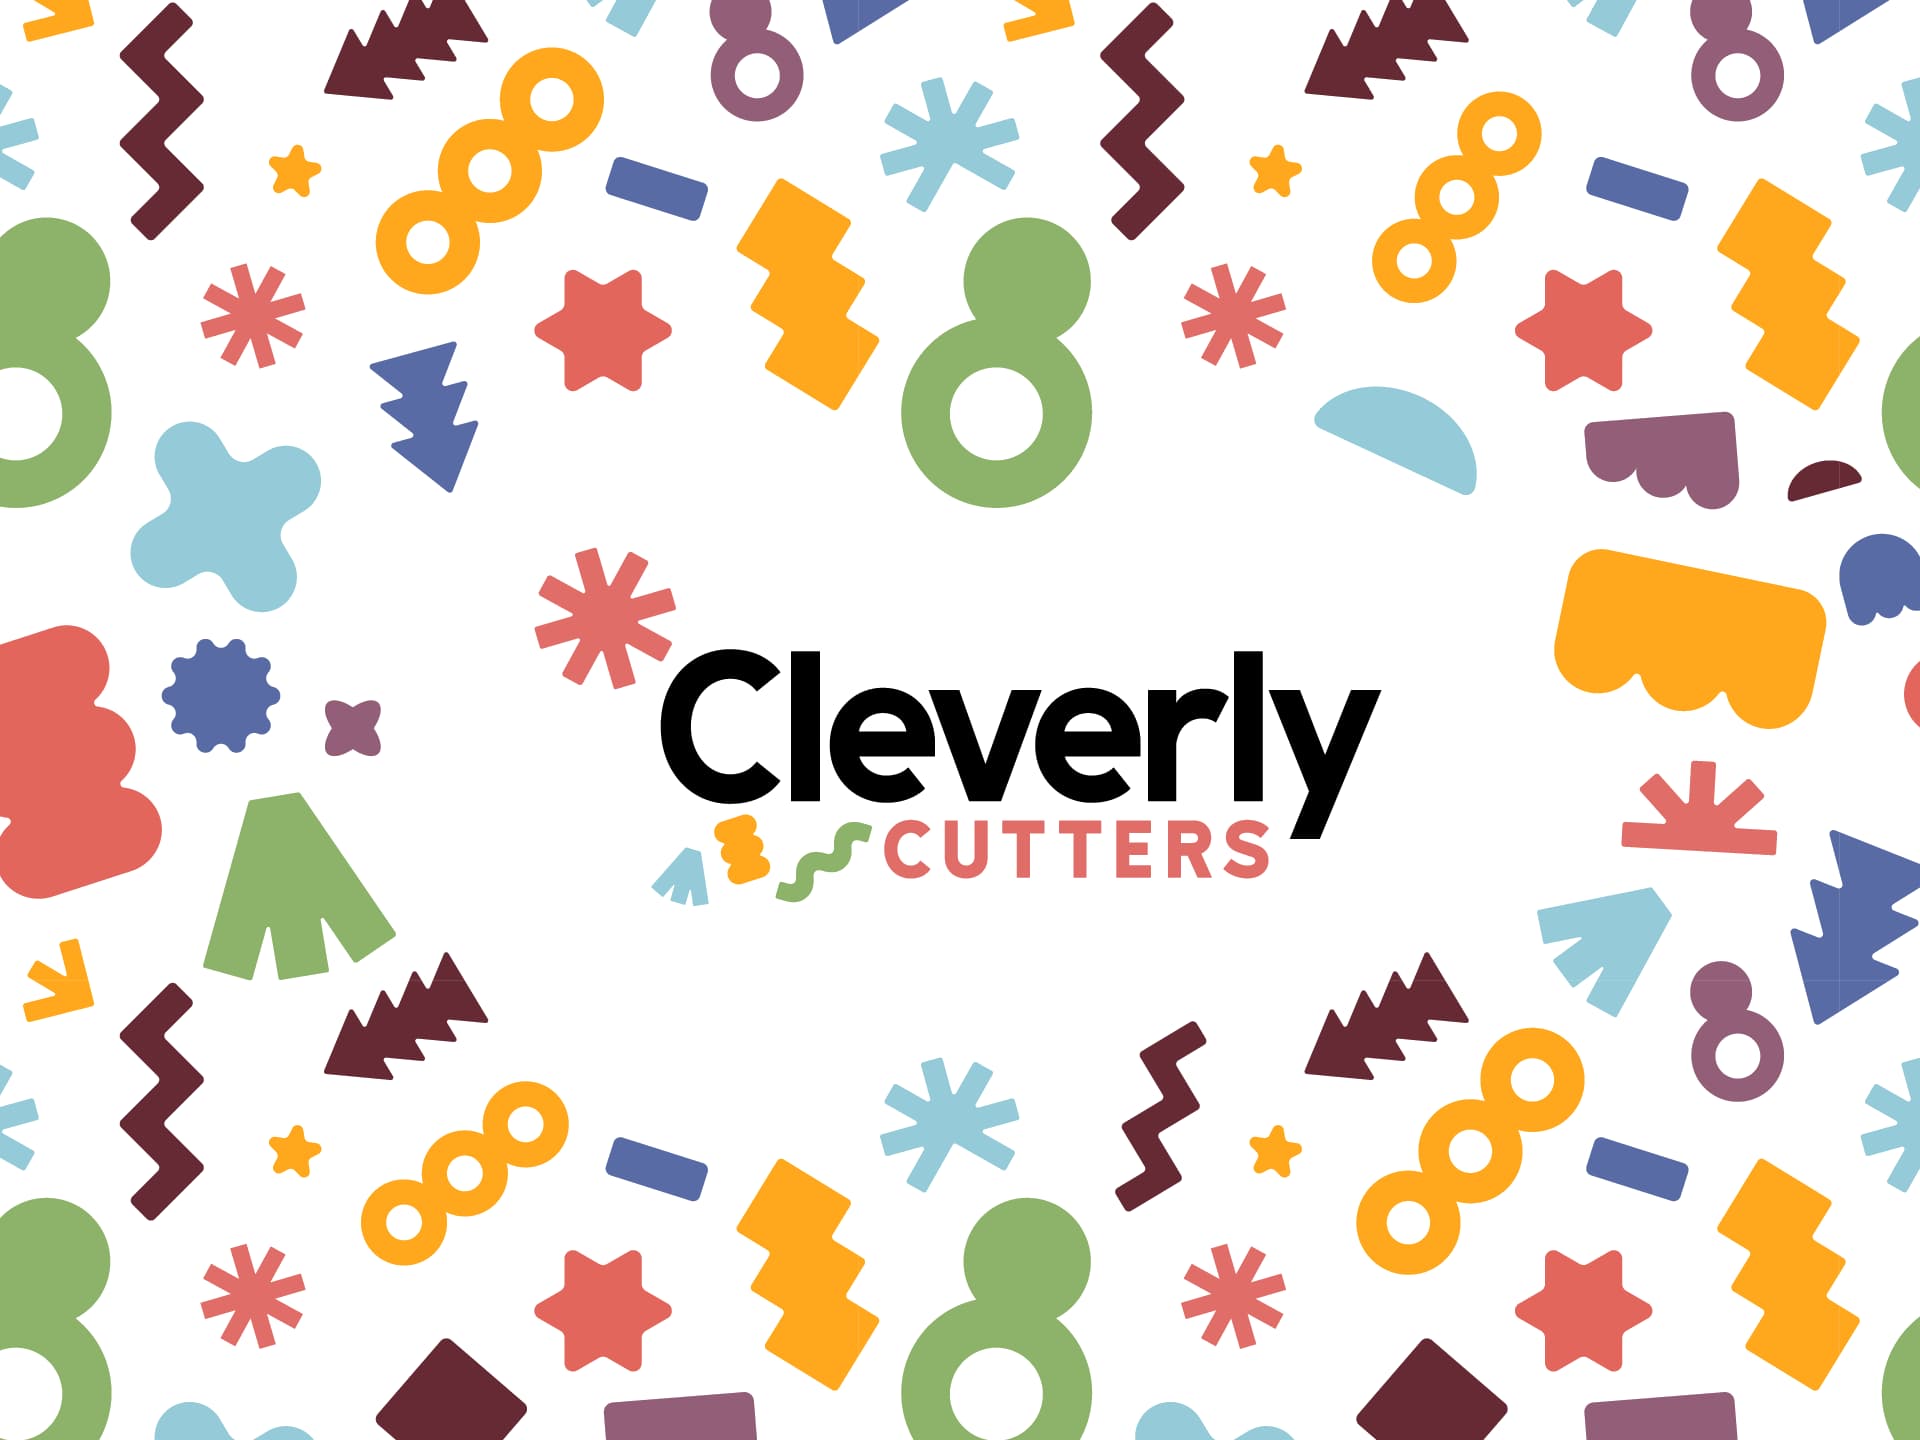 Cleverly Cutters